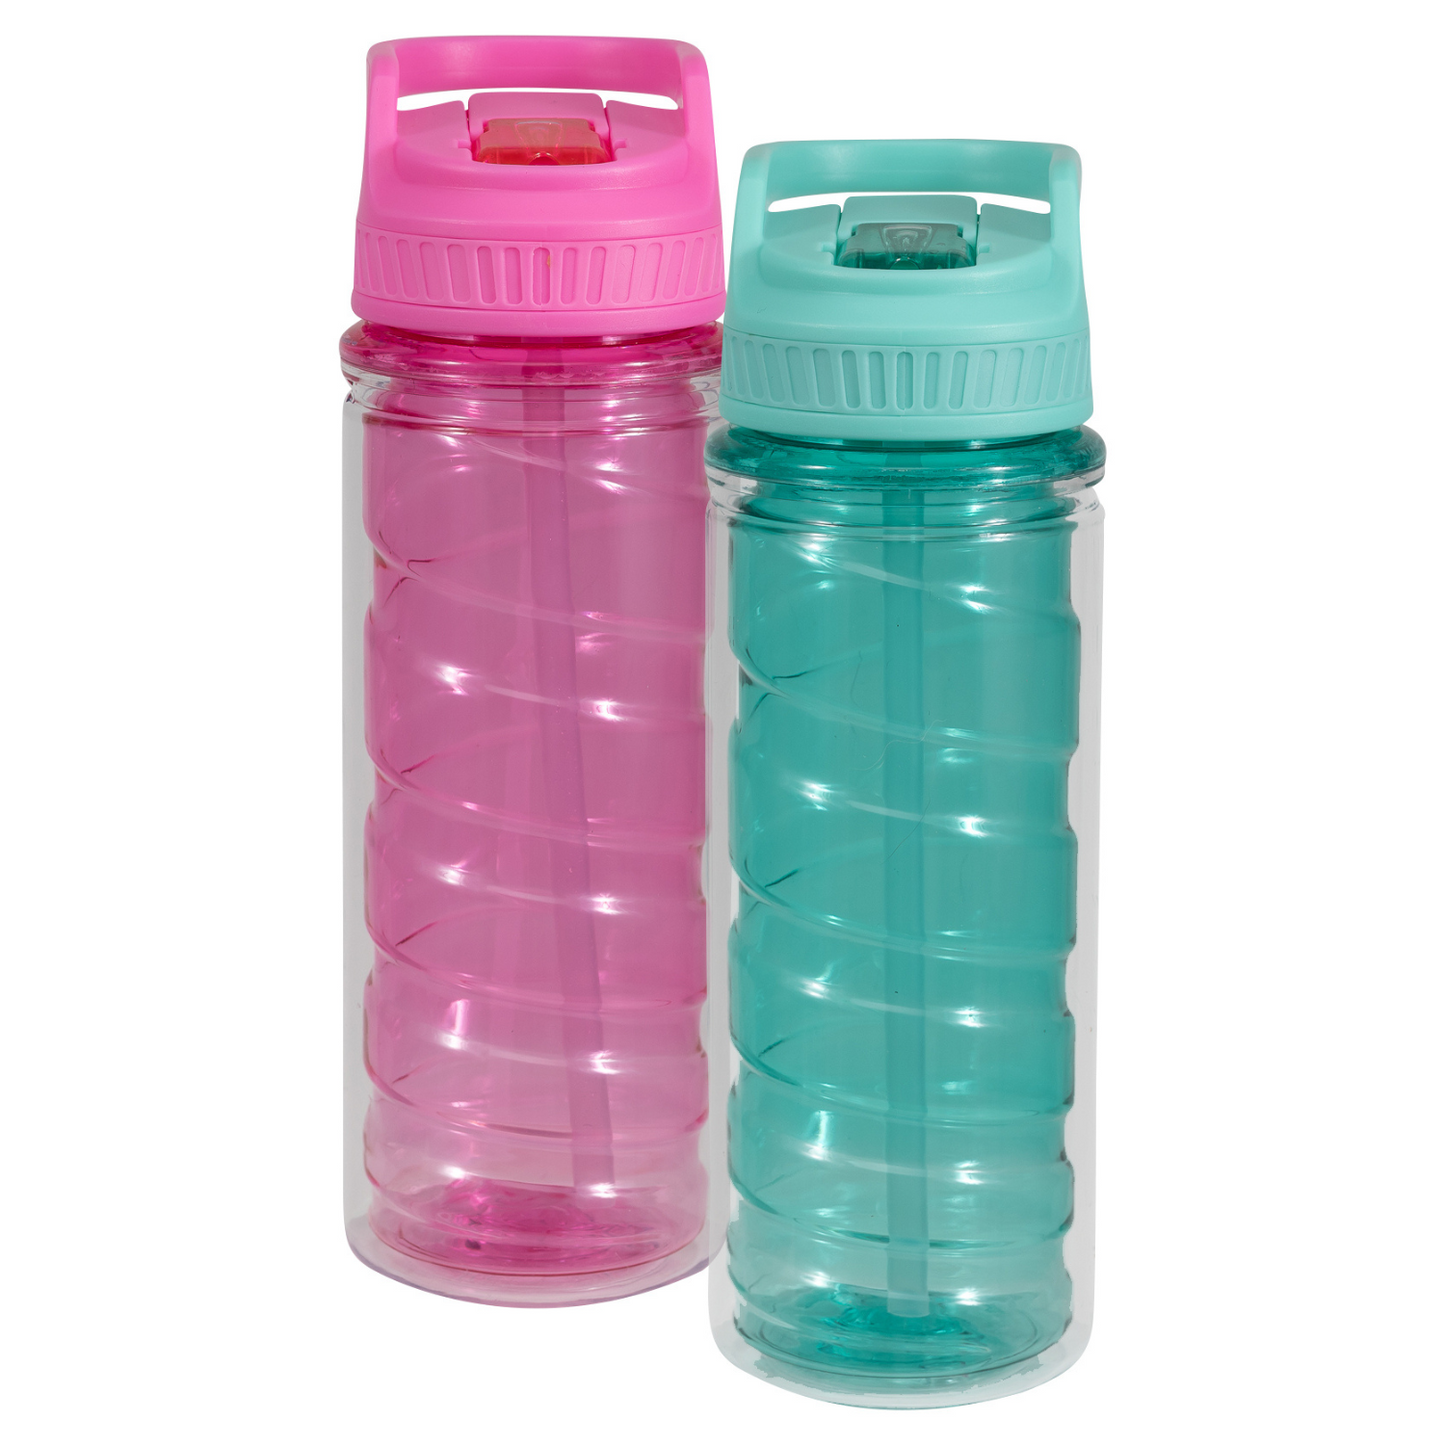 Cool Gear 2-Pack 16 oz Kid's Twist Water Bottle with Double Wall, Sipper  Lid and Finger Loop Cap with Printed Design | Great for School, Sports